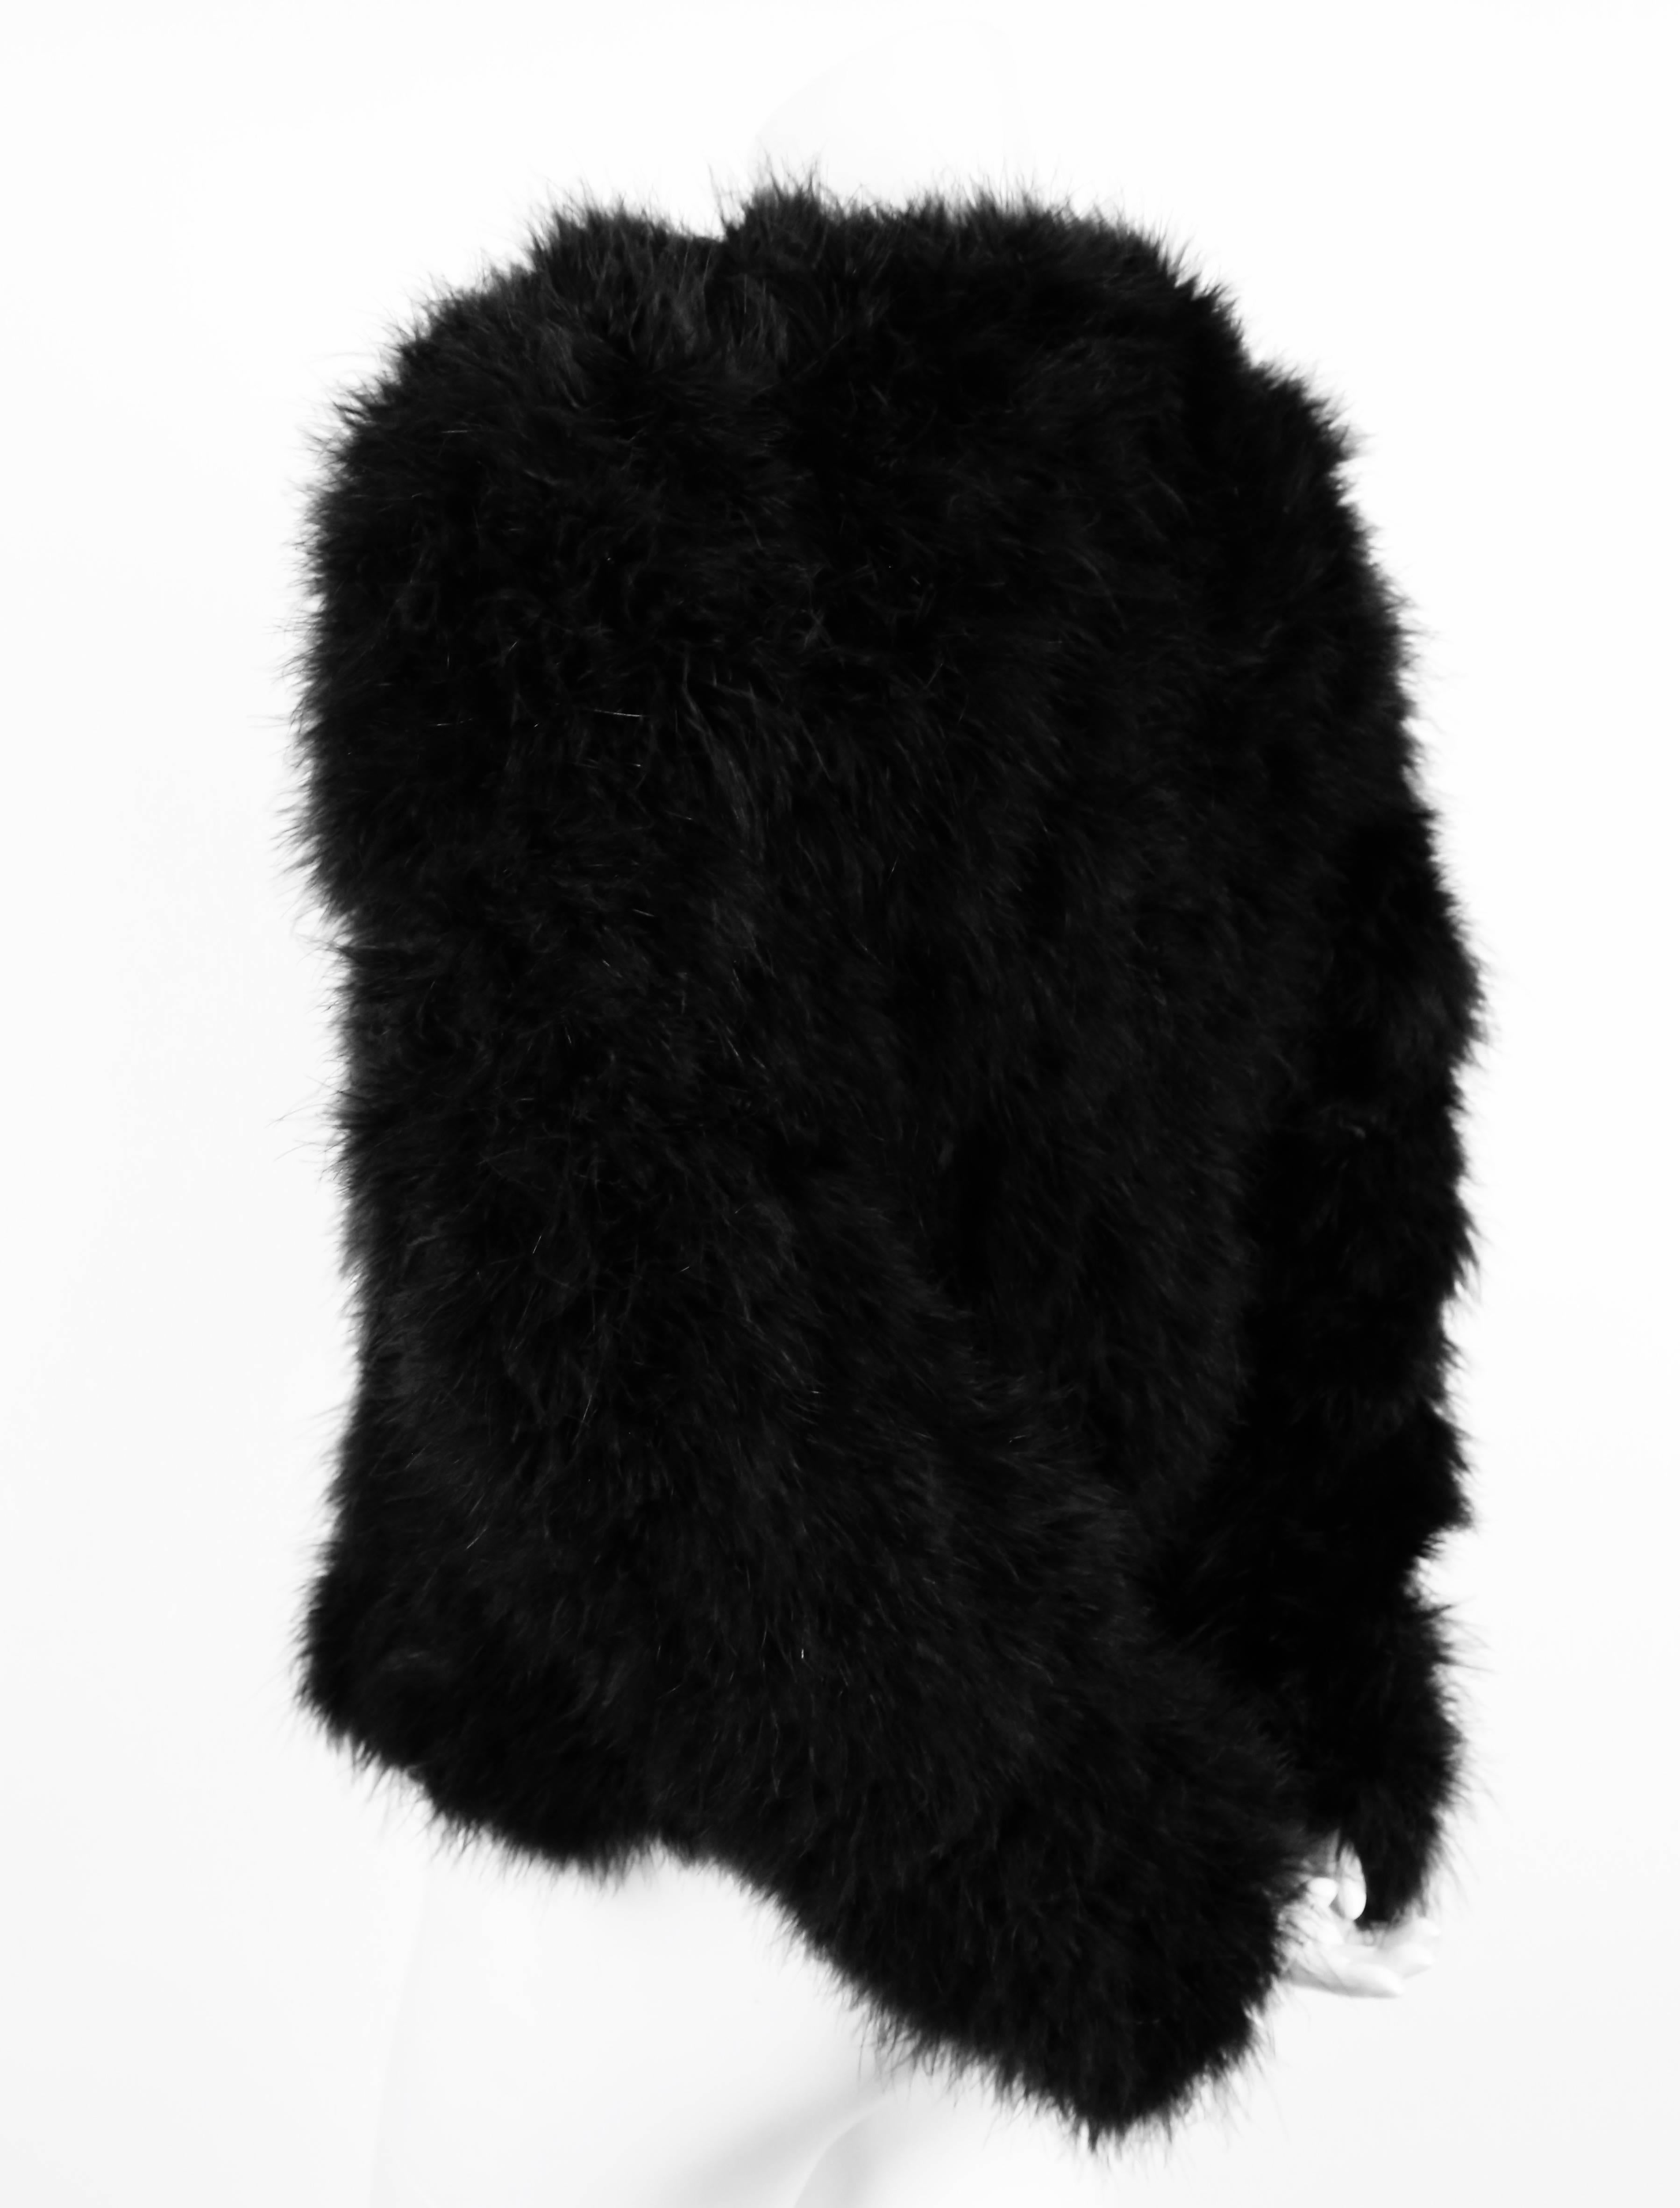 Black marabou chubby jacket by Sonia Rykiel dating to the late 1970's. Labeled a French size 38 although this piece also fits a French 36. Approximate measurements: 15